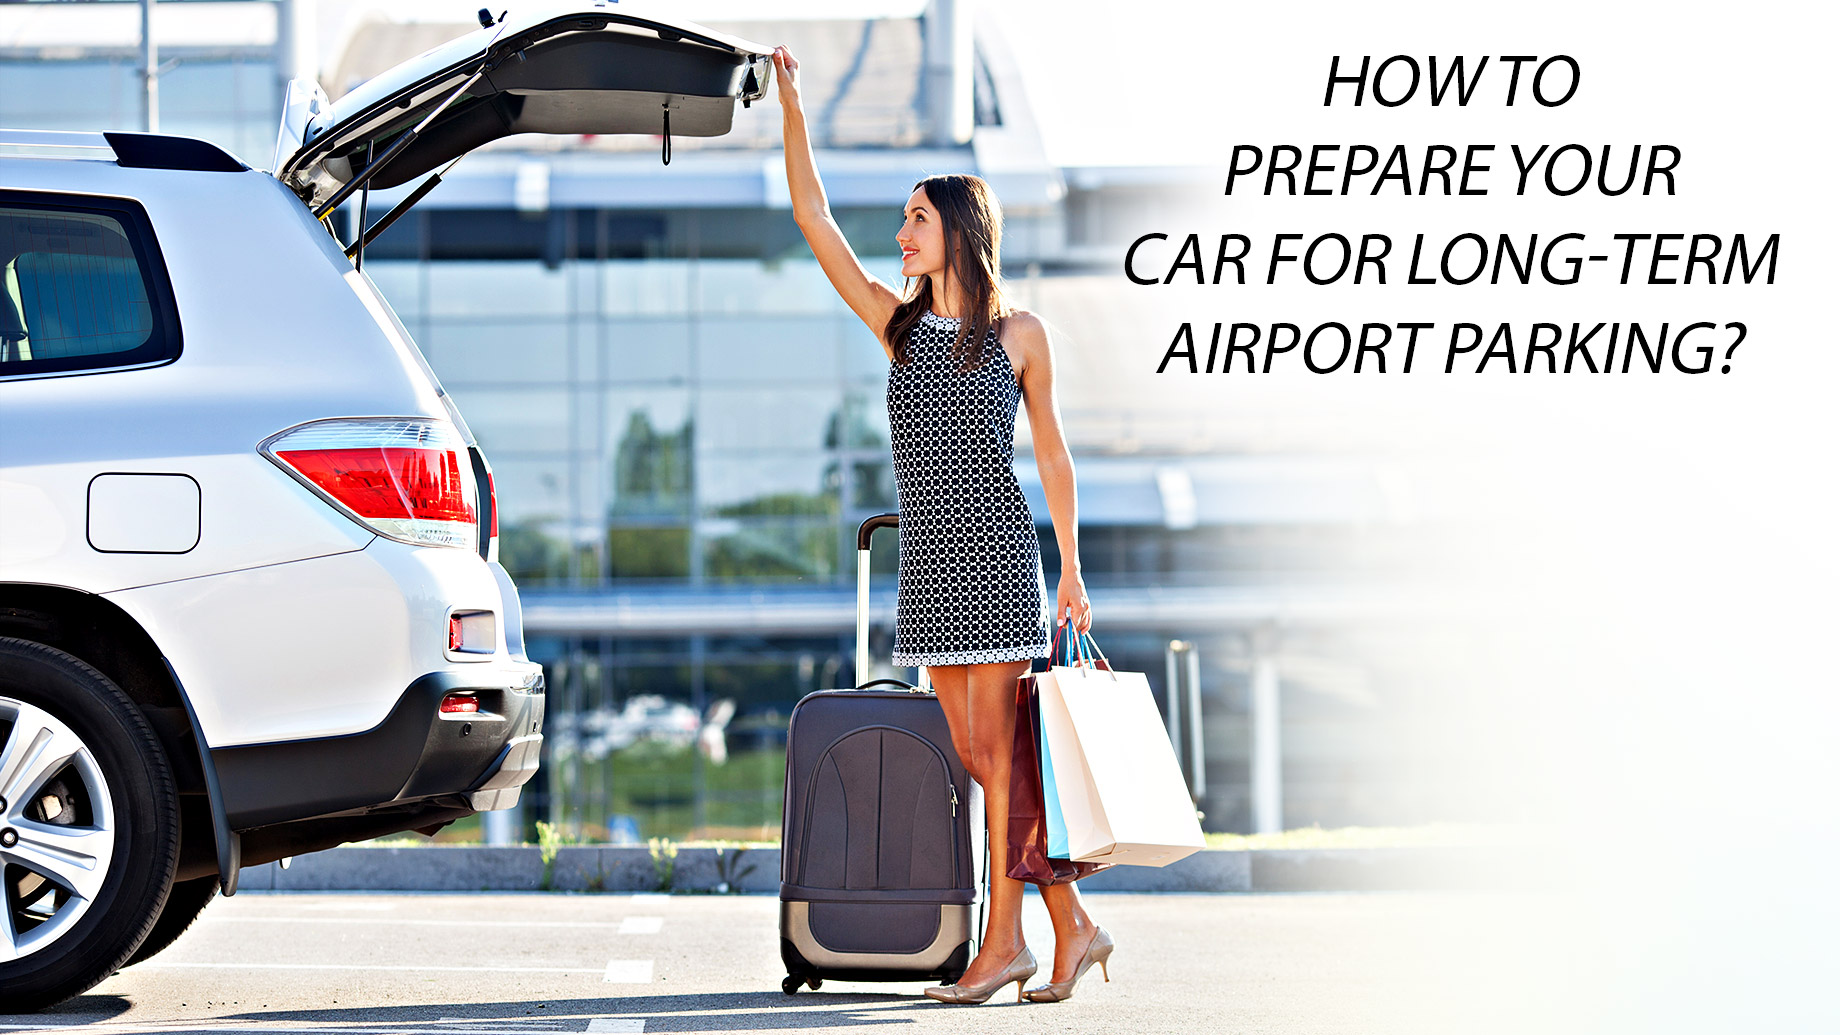 How To Prepare Your Car For Long-Term Airport Parking?